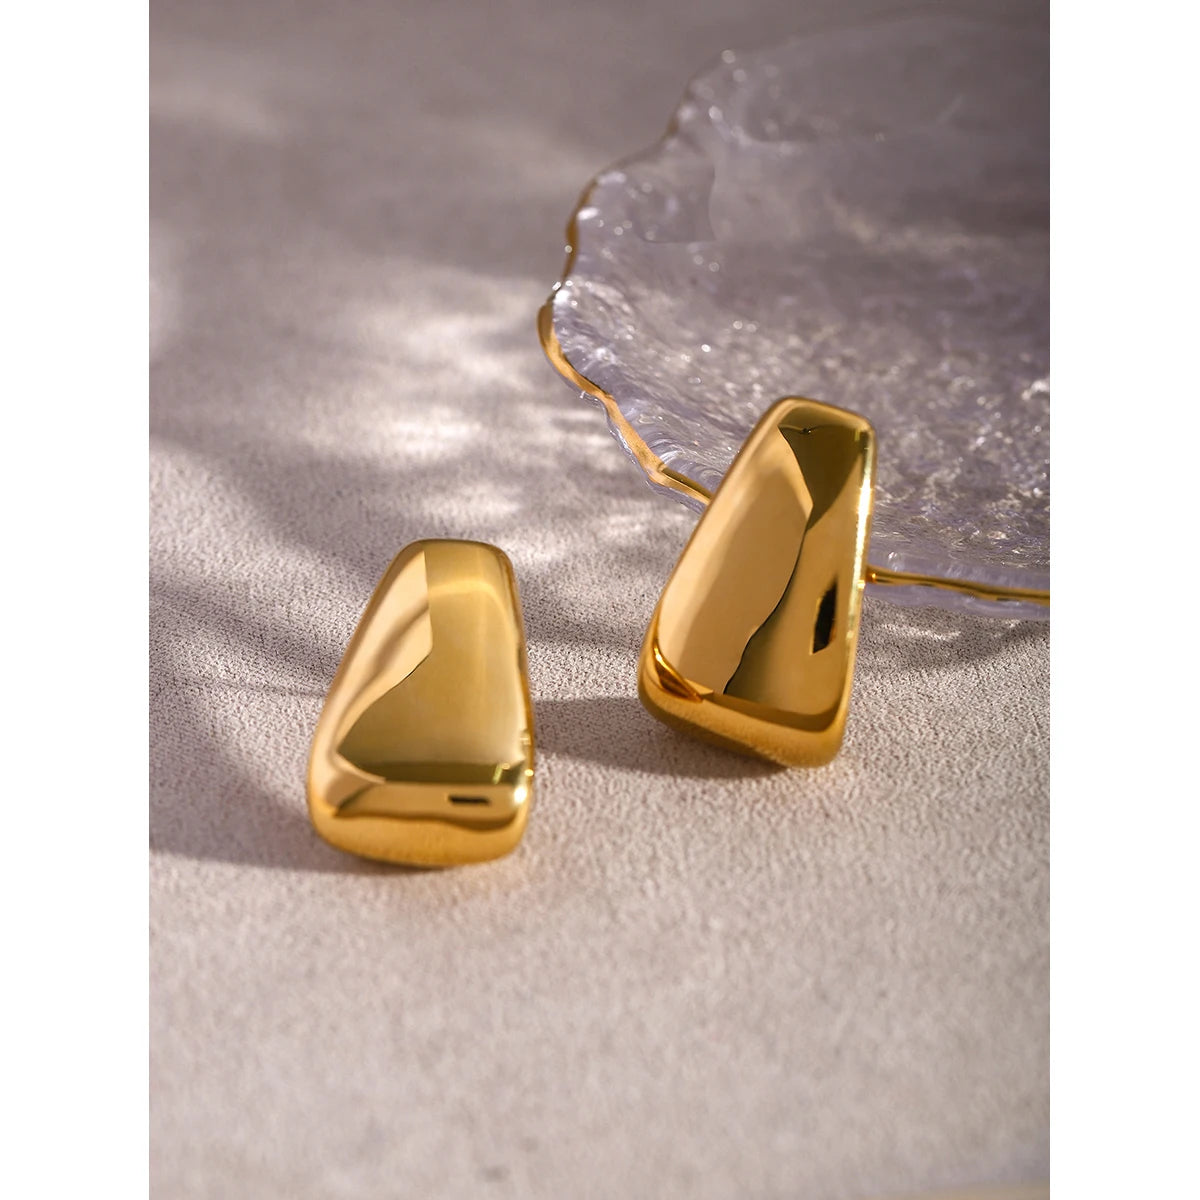 Minimalist Square Stainless Steel Earrings 18K Gold Plated